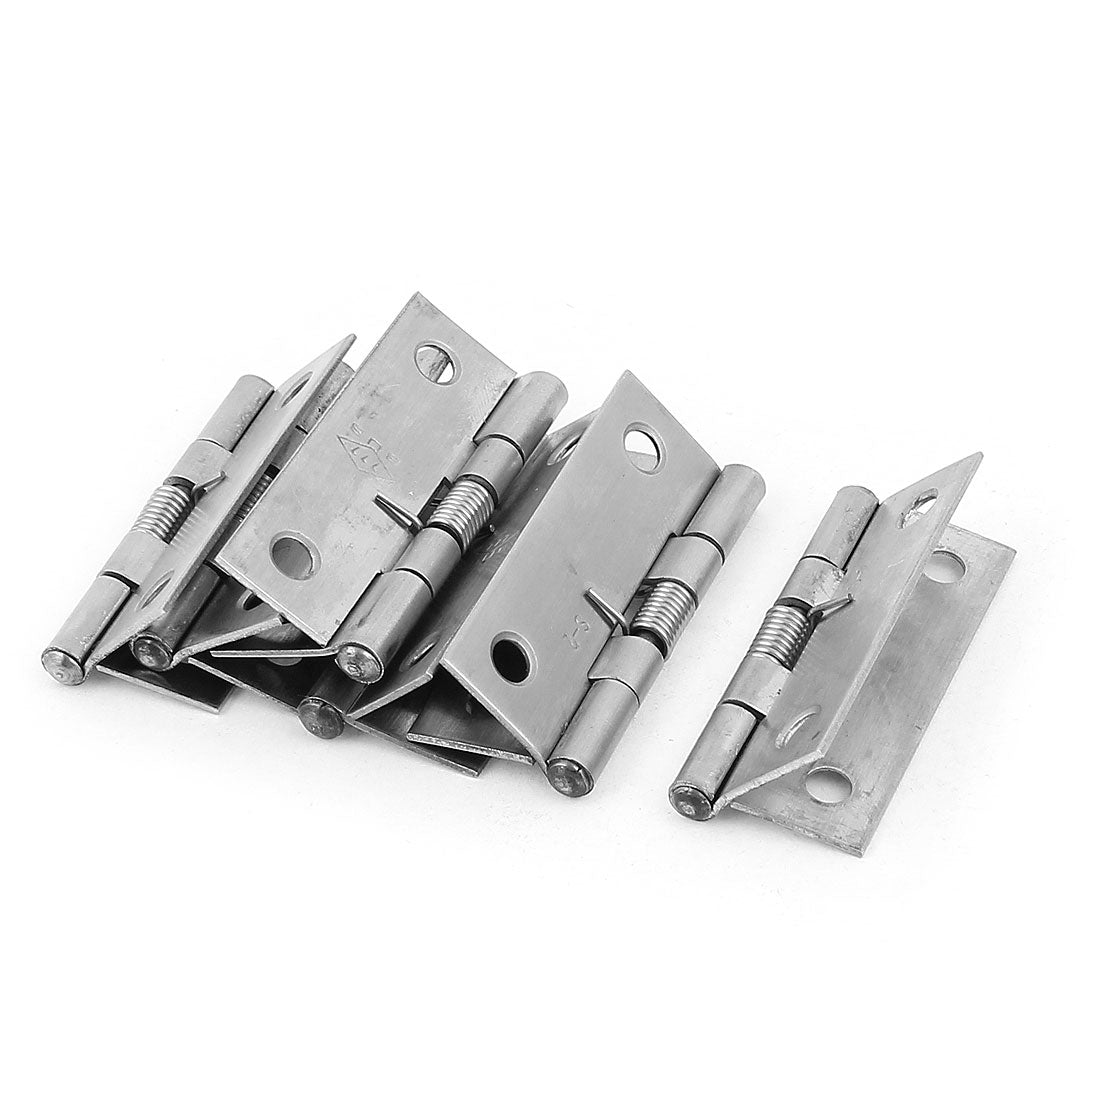 uxcell Uxcell 52mm Long Spring Loaded Cupboard Cabinet Closet Door Hinge Silver Tone 6Pcs